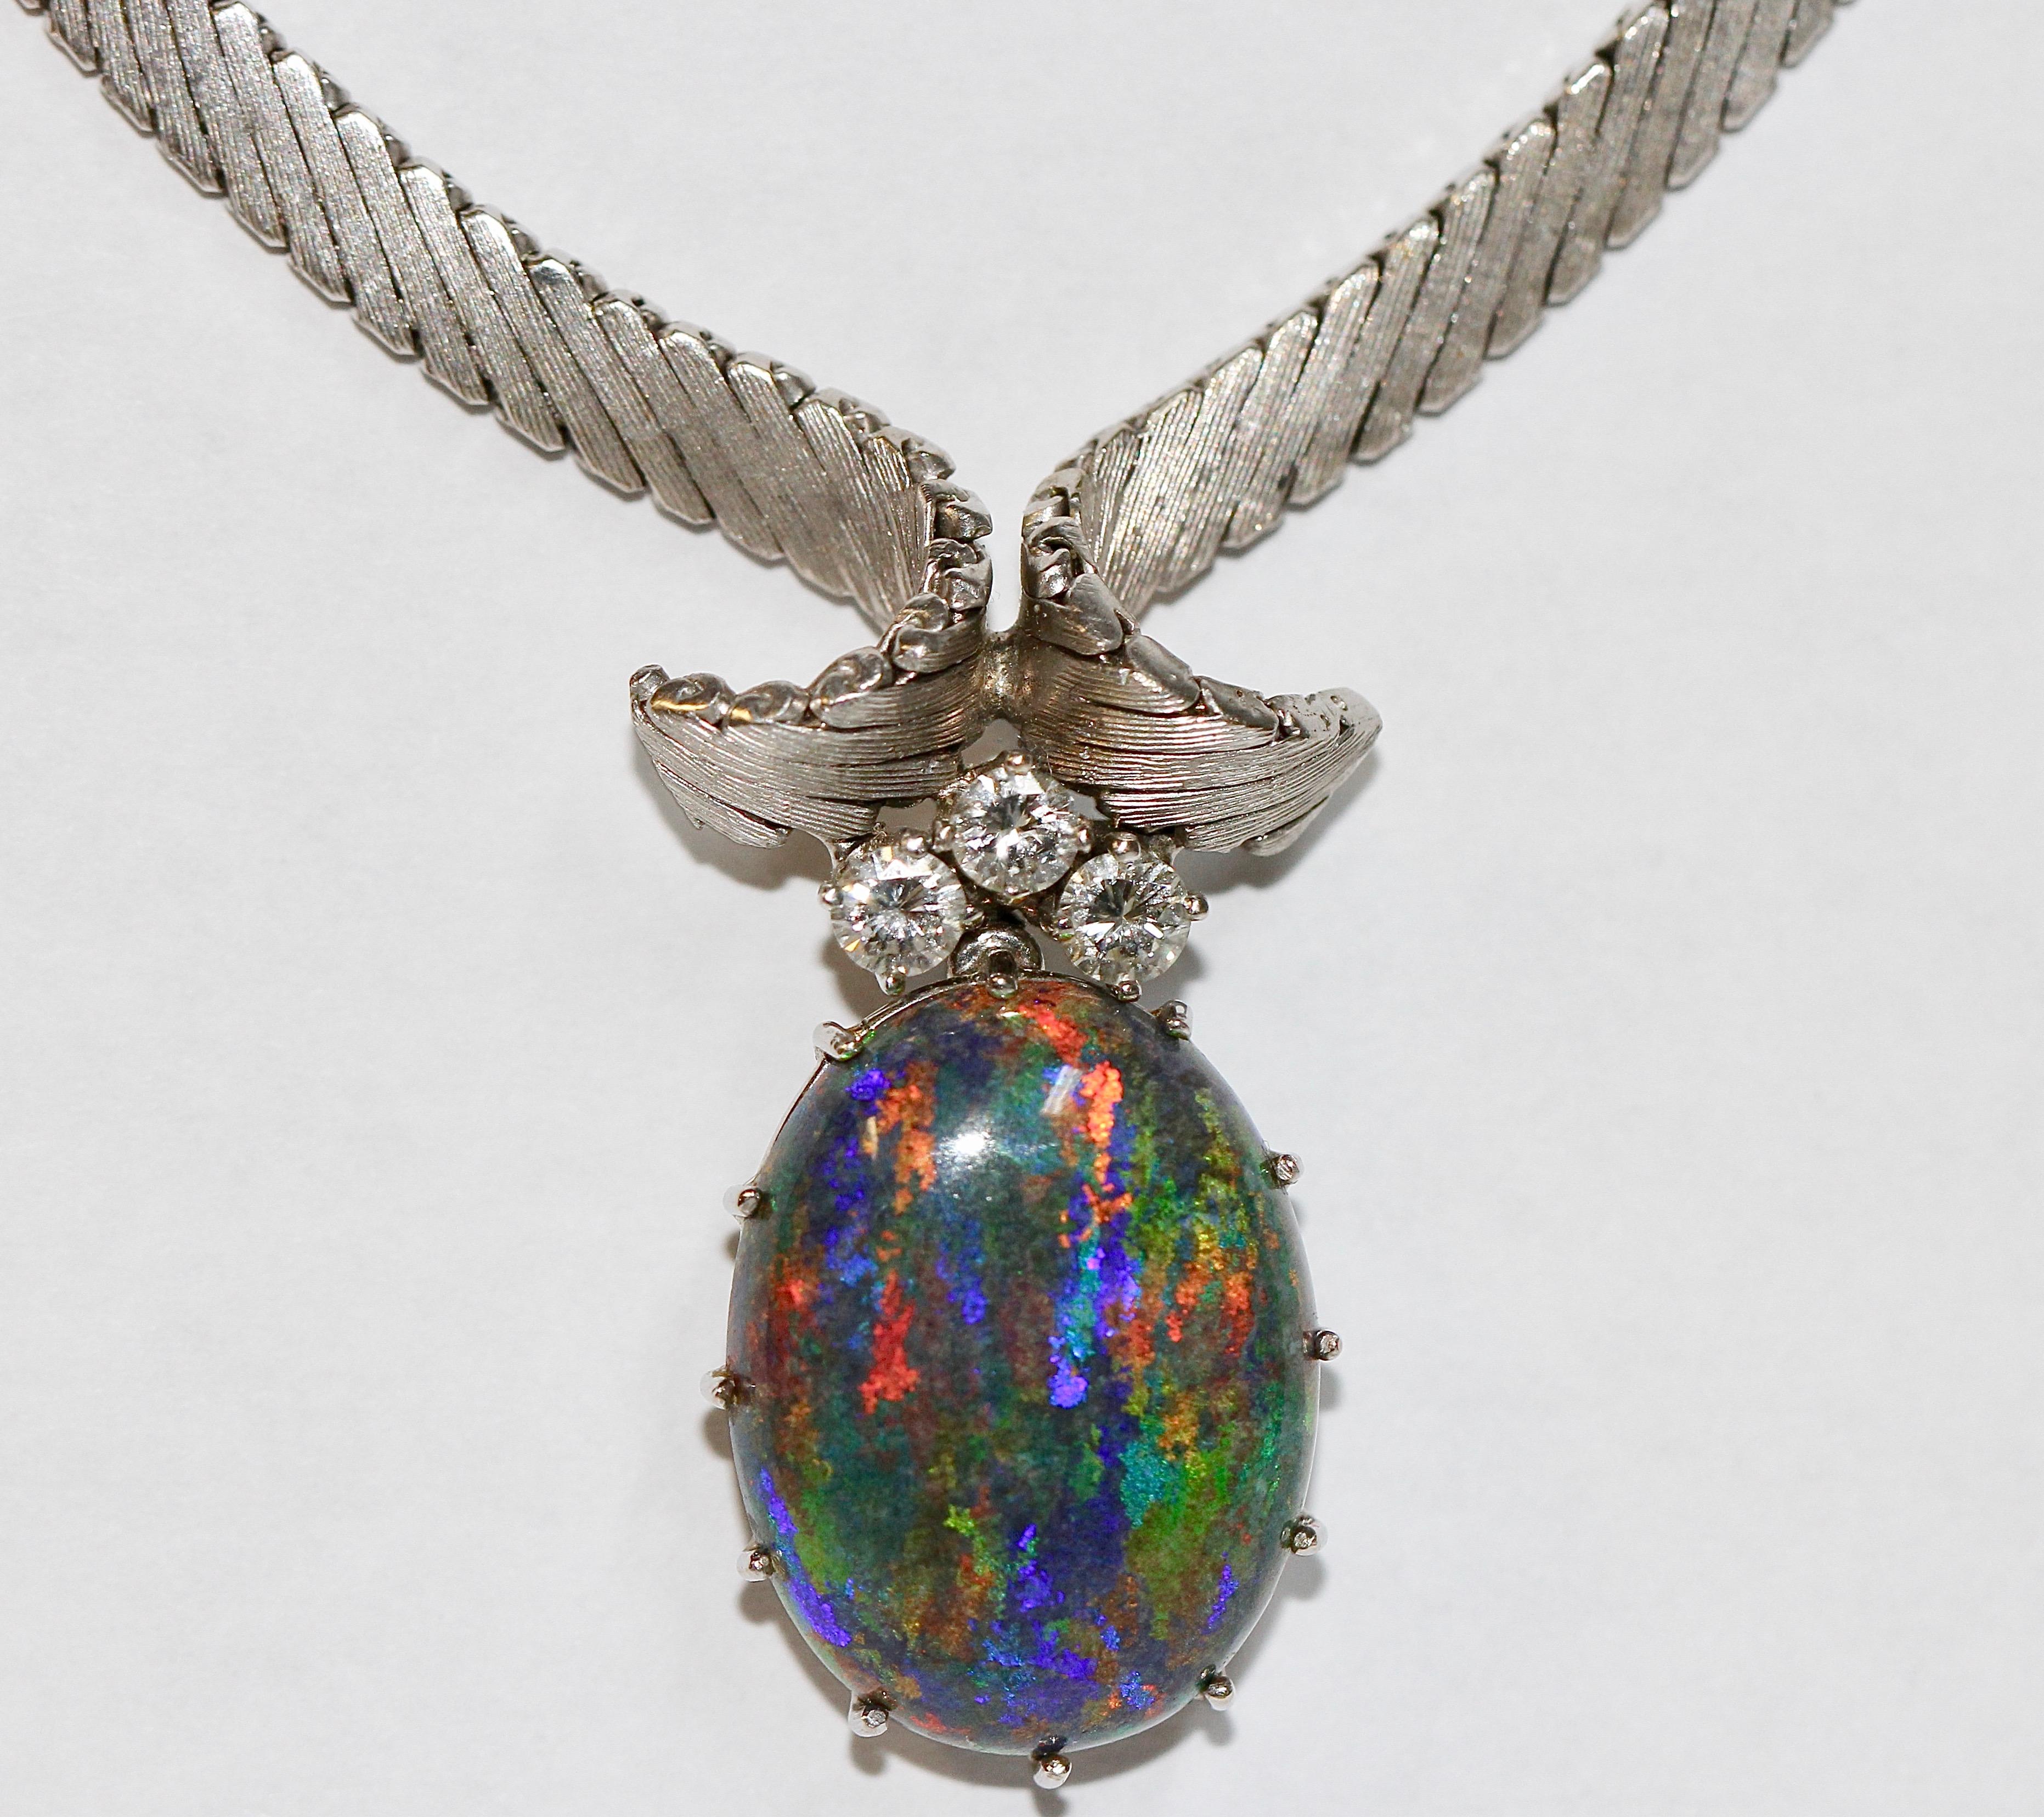 Magnificent 18k white gold necklace with Australian opal and diamonds.

This extraordinary necklace captivates with a large, oval and natural, Australian opal.

This natural full opal has strong, intense colors and a strong play of colors.

The size